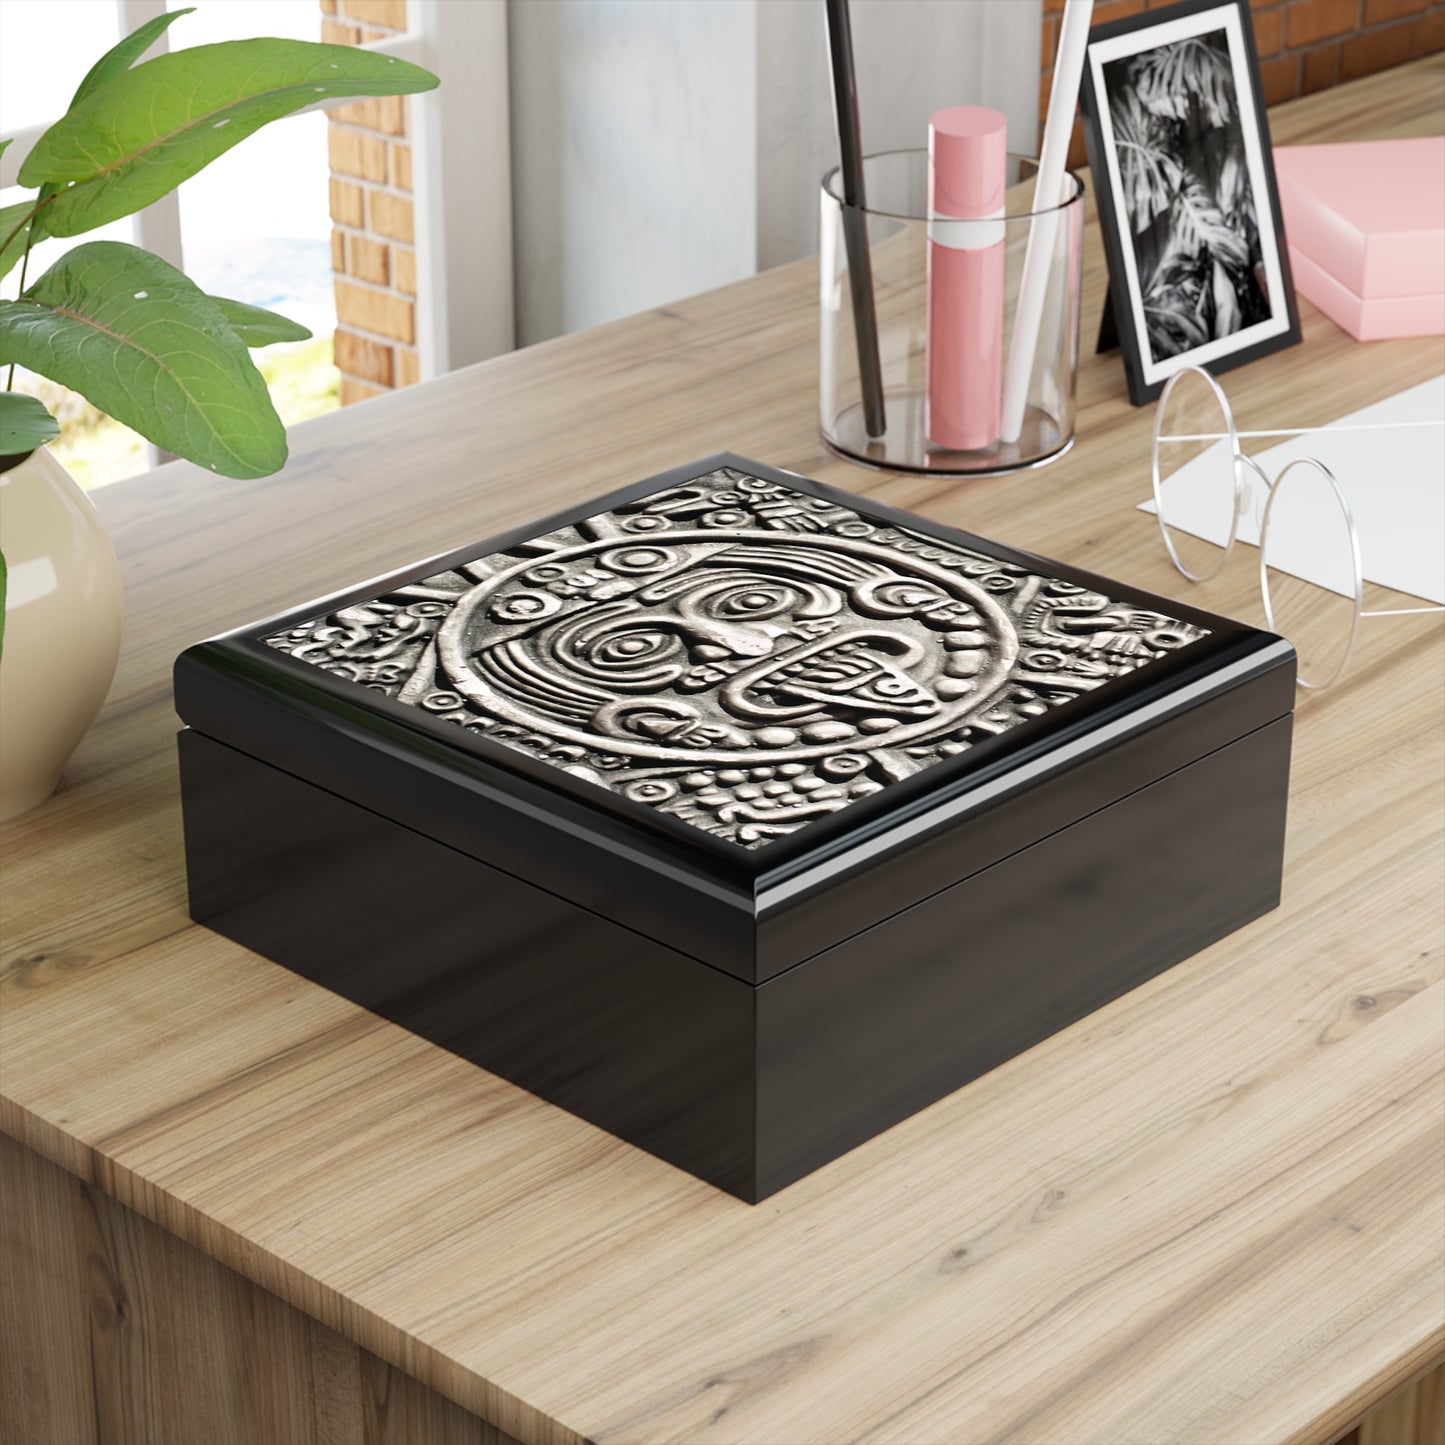 Aztec Calendar Printed Tile Jewelry Box - Black and White